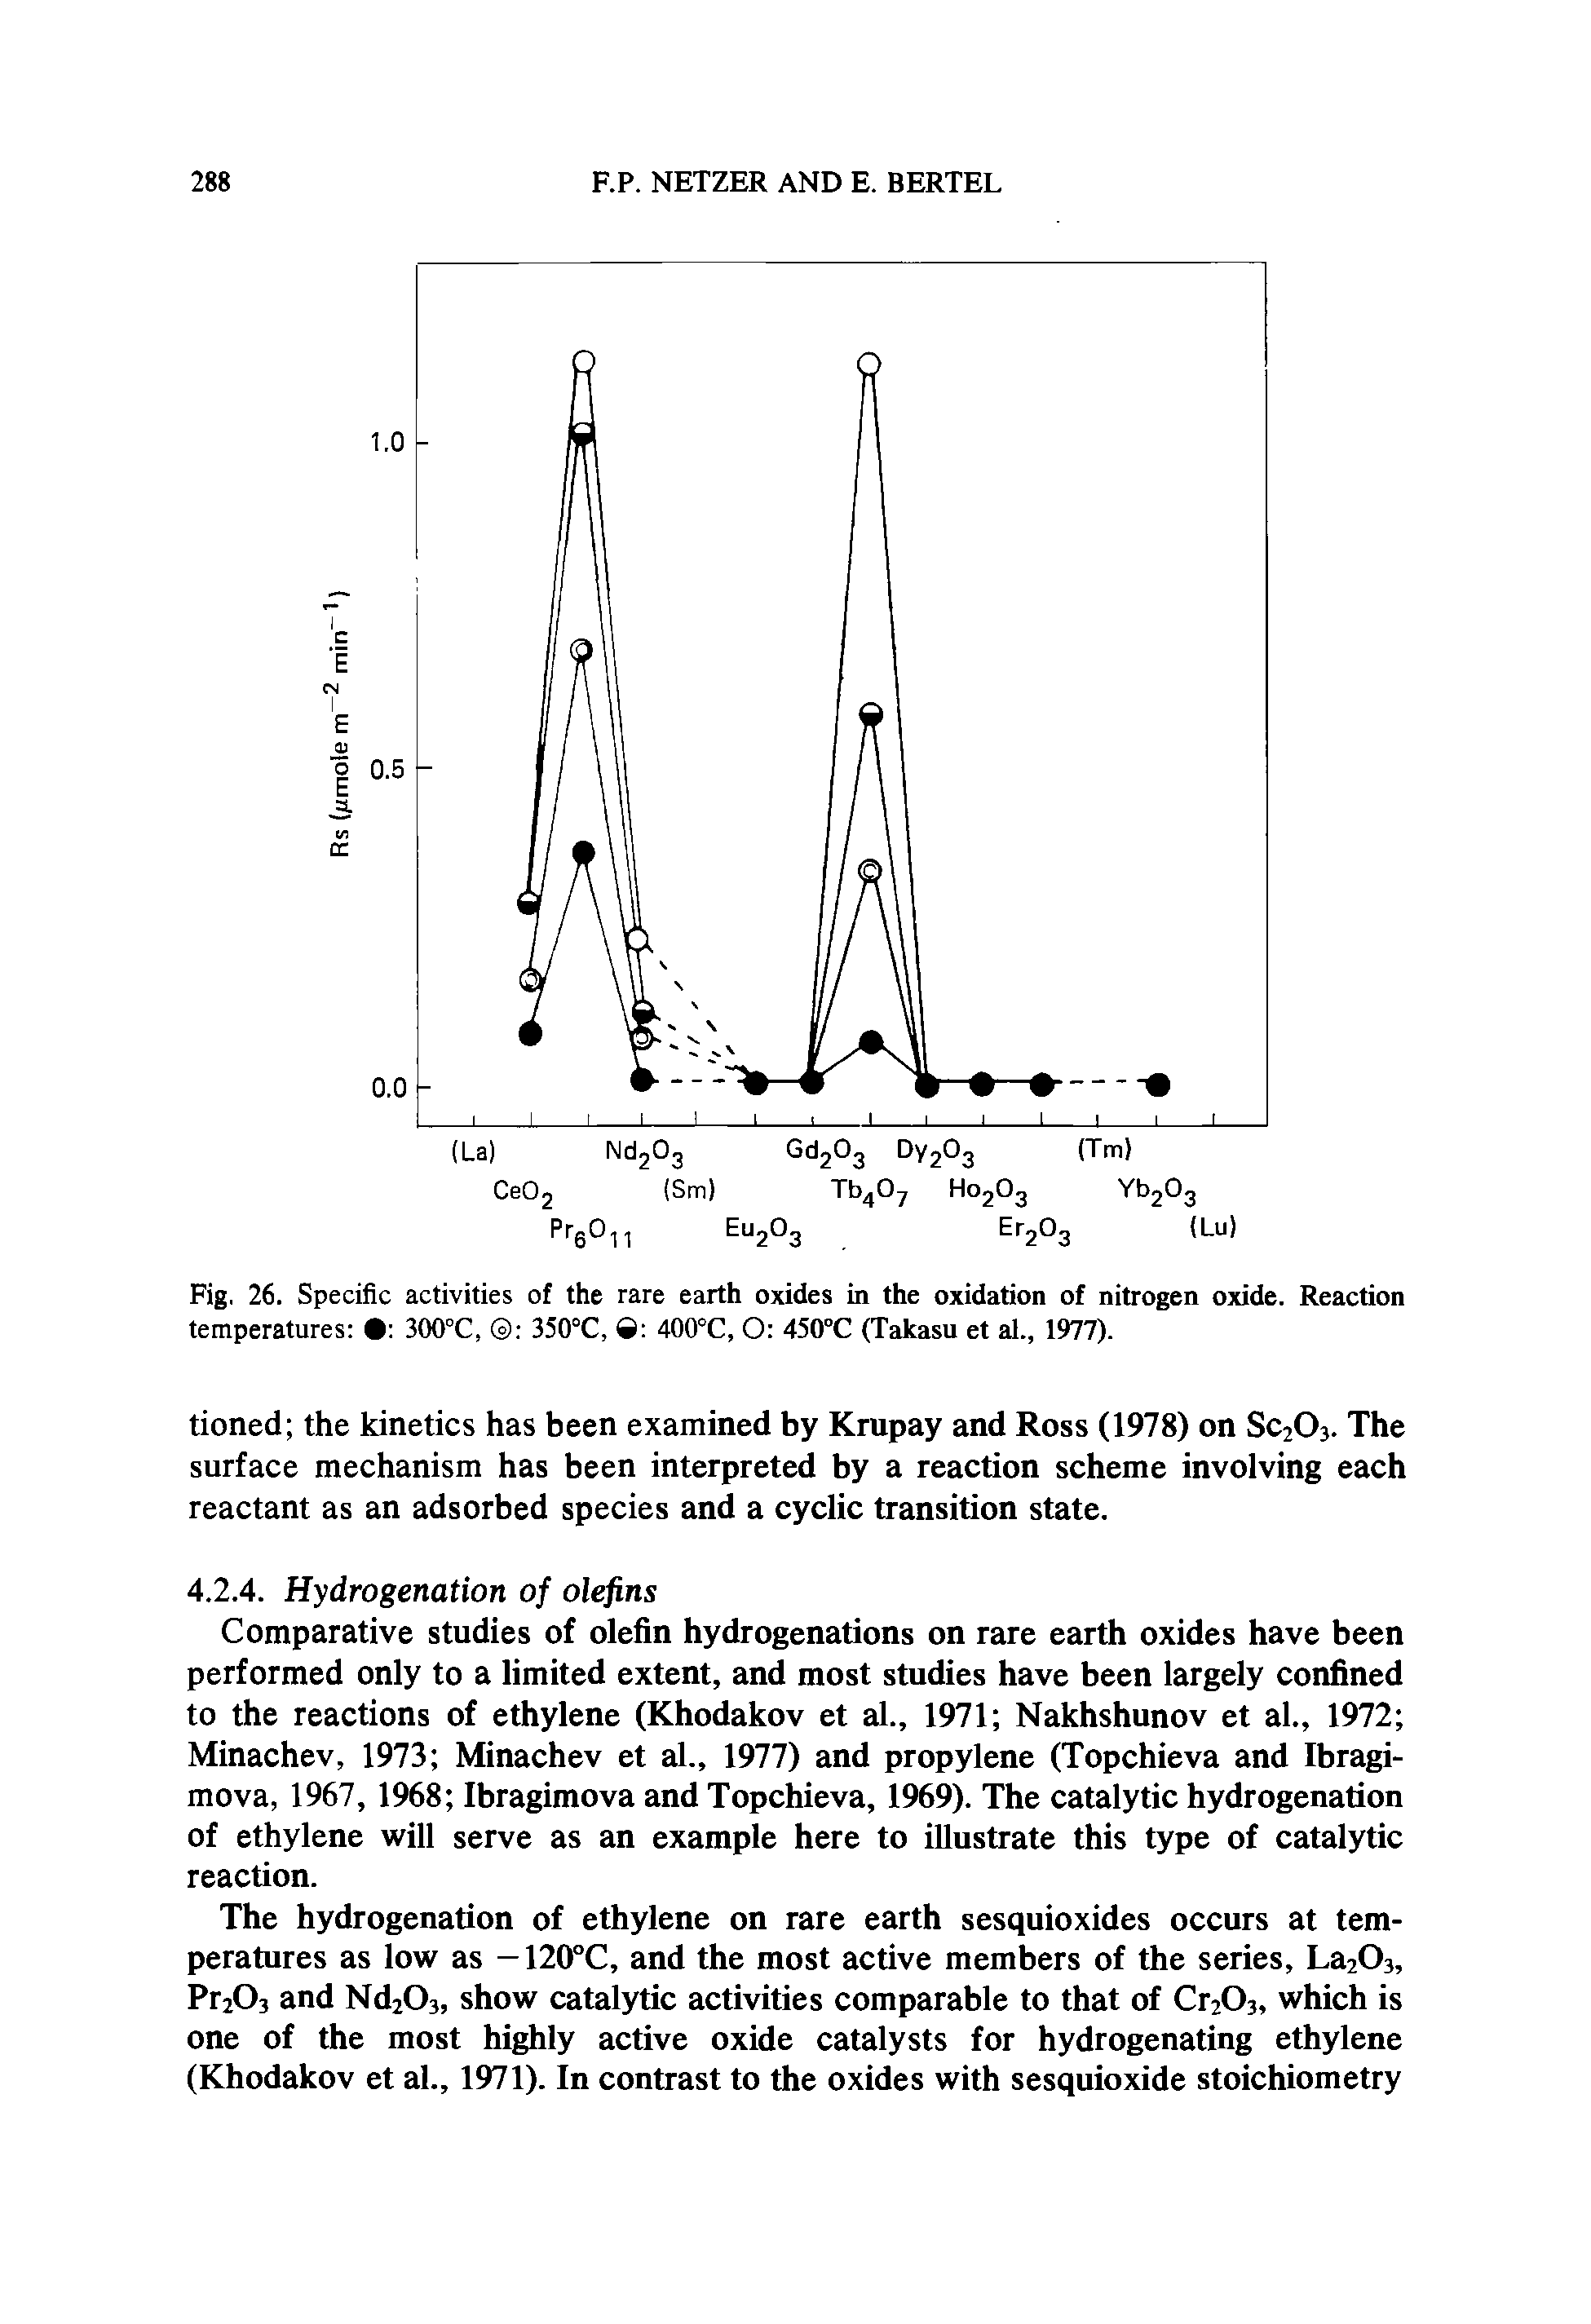 Fig. 26. Specific activities of the rare earth oxides in the oxidation of nitrogen oxide. Reaction temperatures 300°C, 350°C, O 400°C, O 450°C (Takasu et al., 1977).